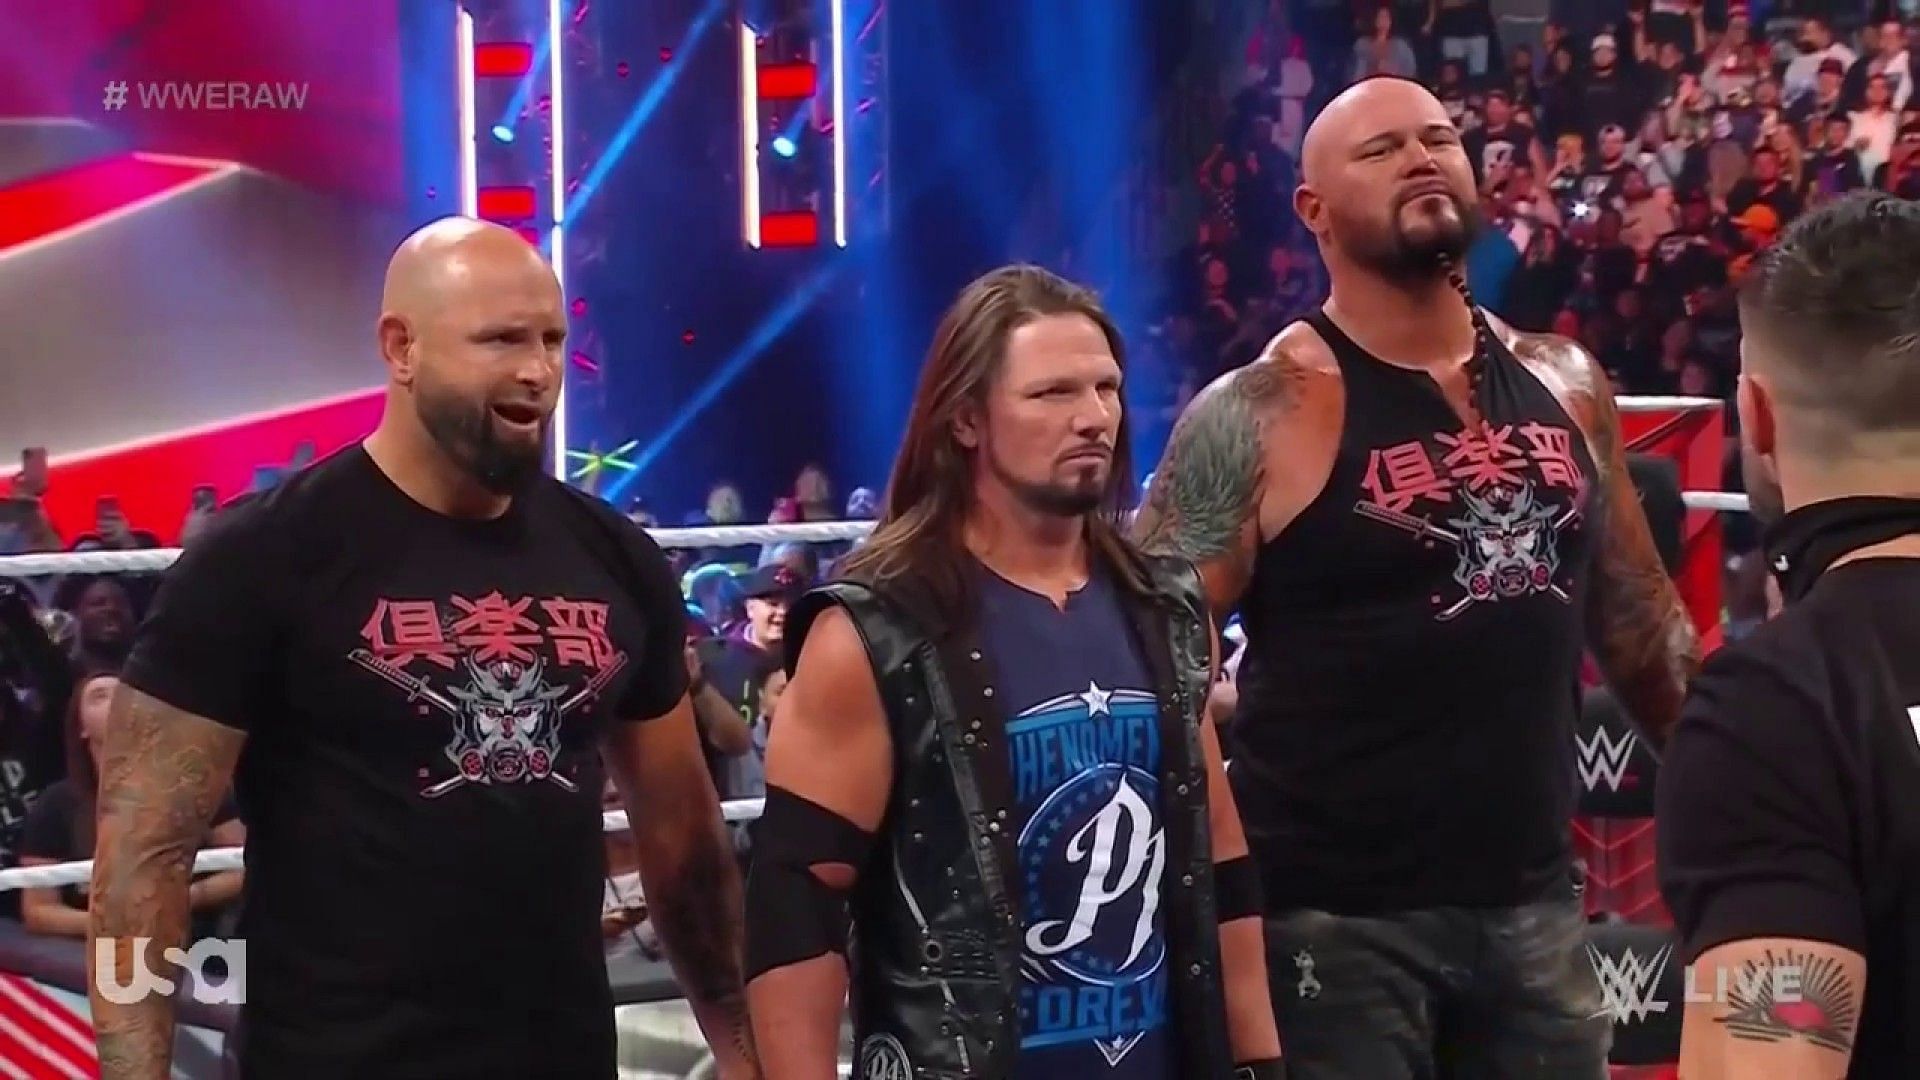 The O.C. recently reunited on WWE RAW.